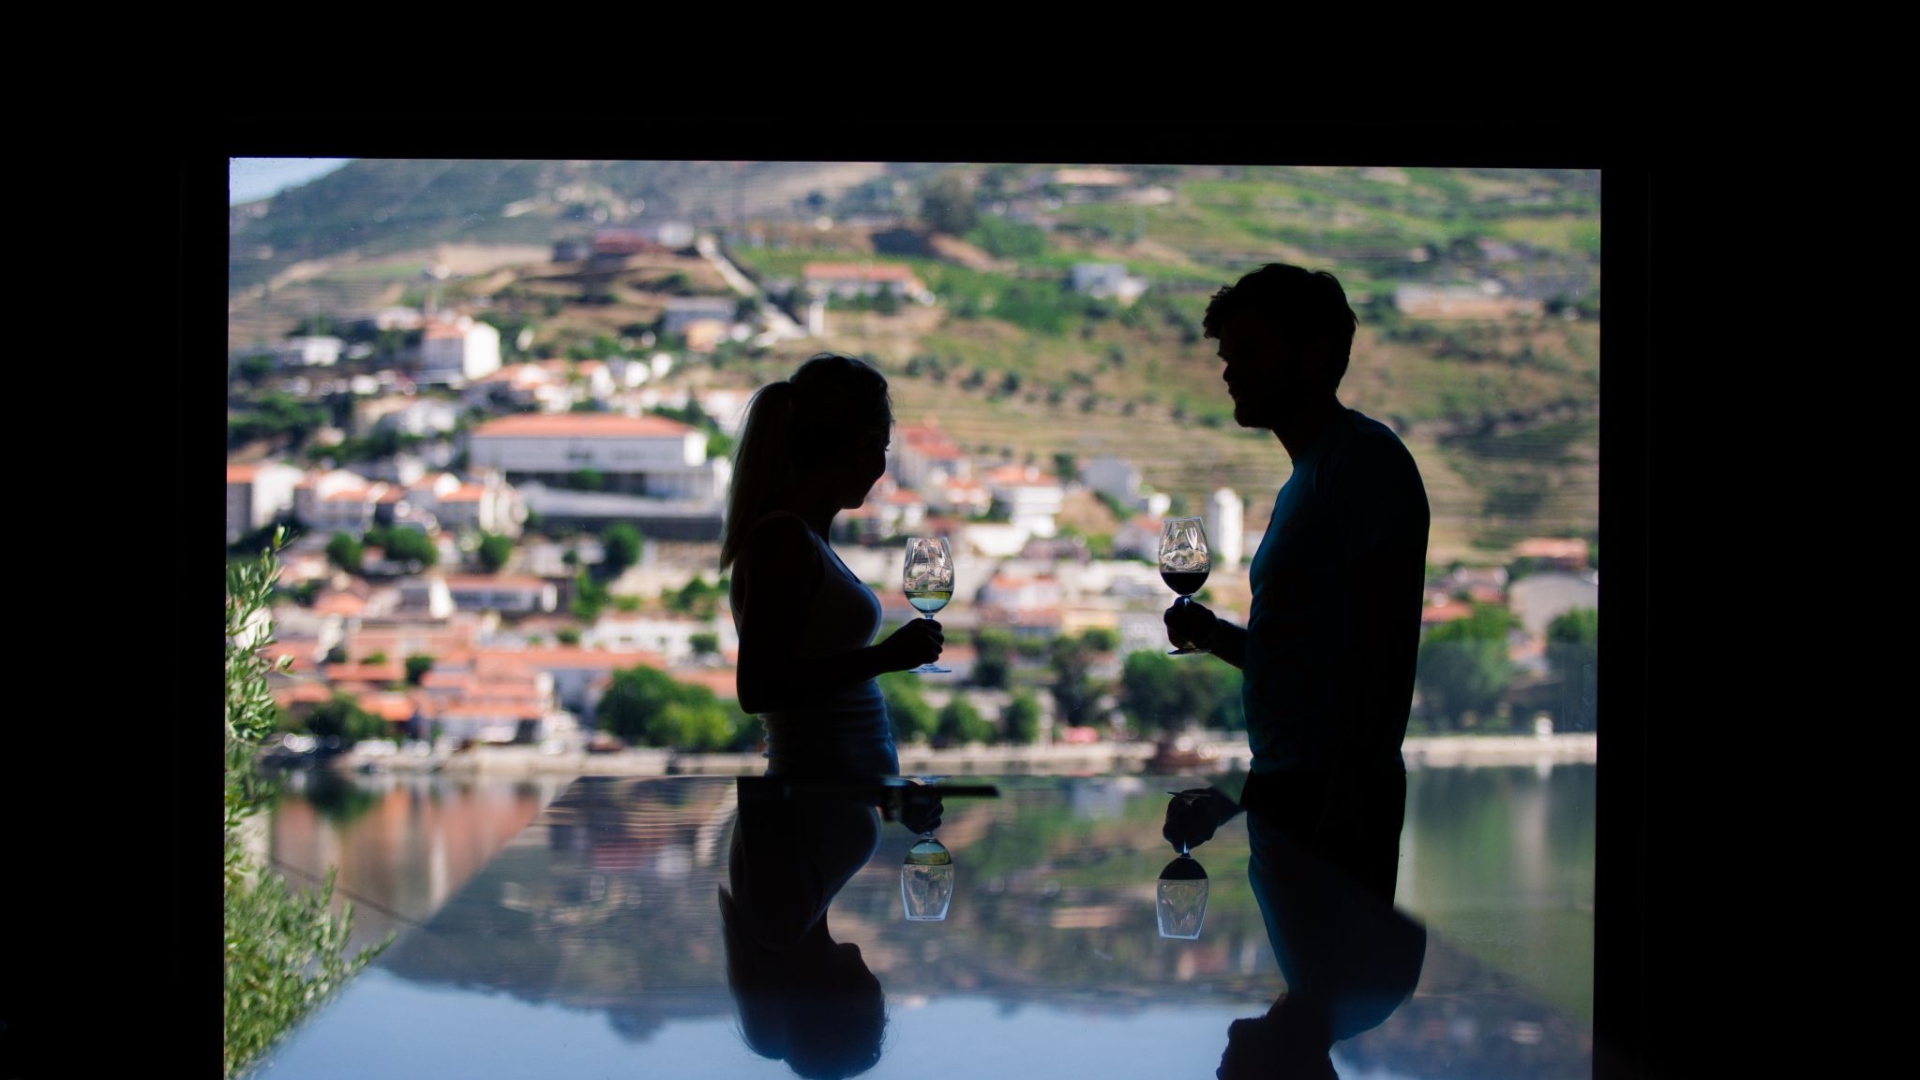 Discover the Best Hotels in Douro Valley Portugal